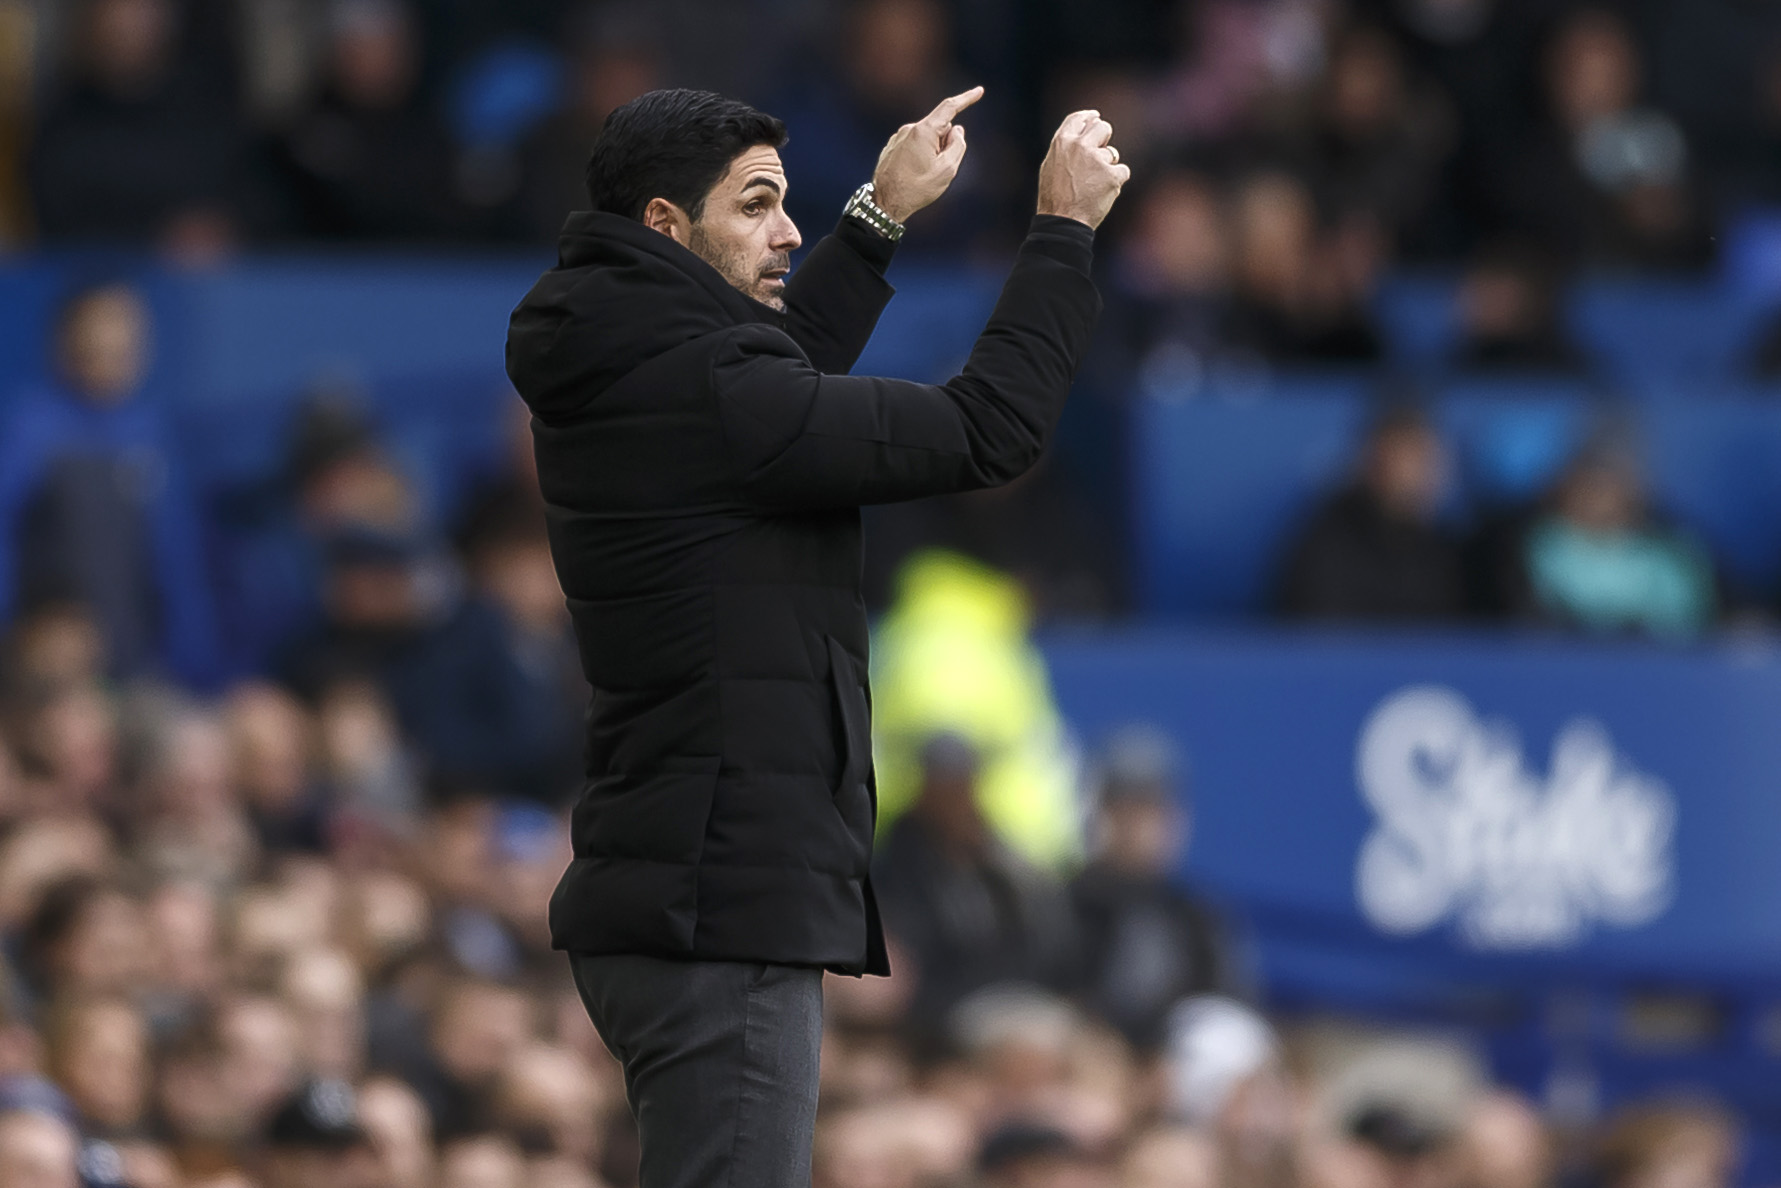 Mikel Arteta speaks to the media ahead of Arsenal's home clash against Everton